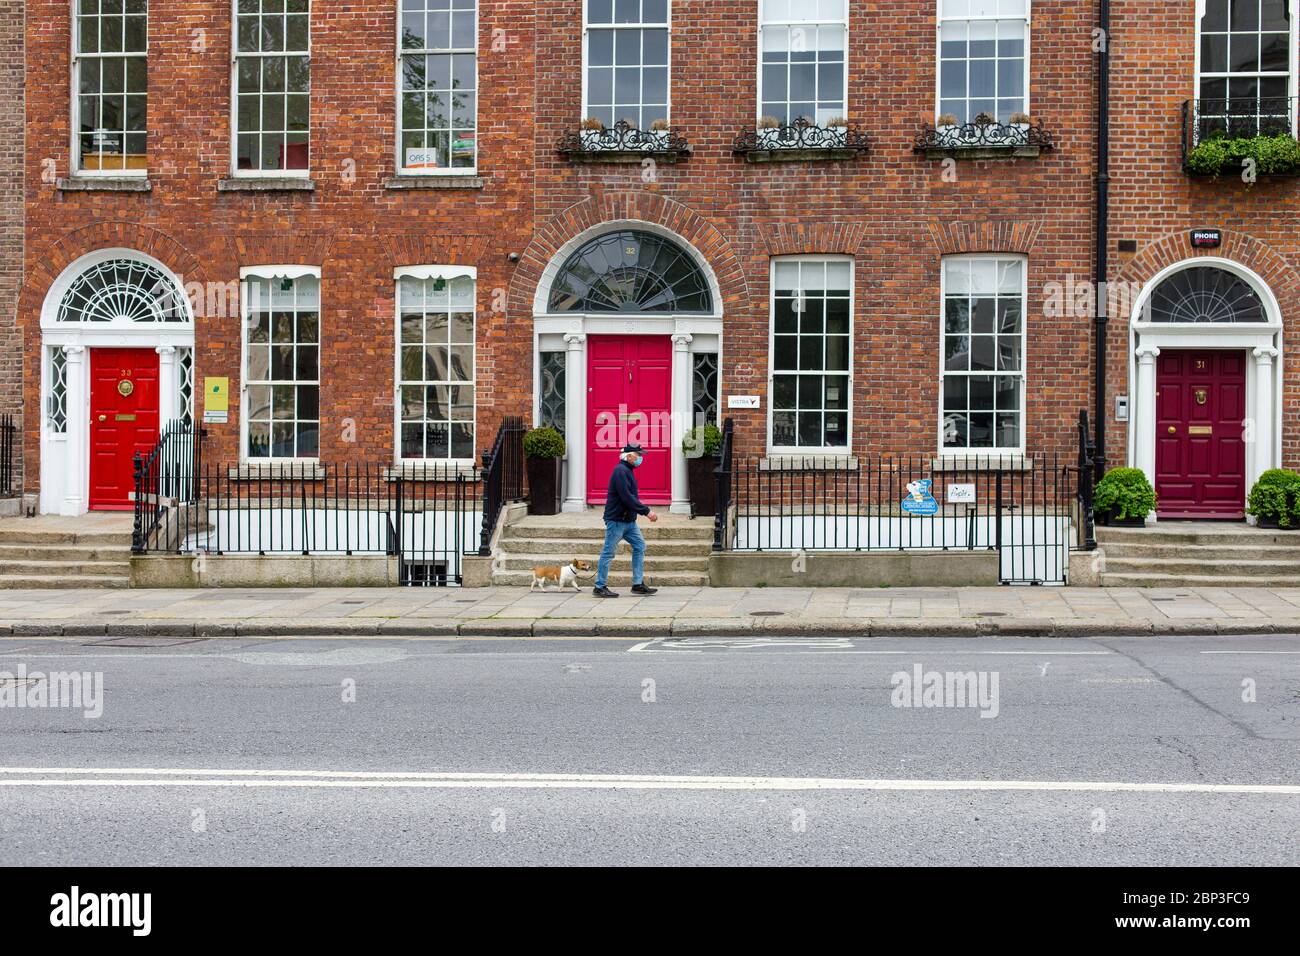 Dublin, Ireland. May 2020. Man wearing a face mask walks with a dog  along the deserted Upper Merrion Street. Covid-19. Iconic Dublin red doors. Stock Photo